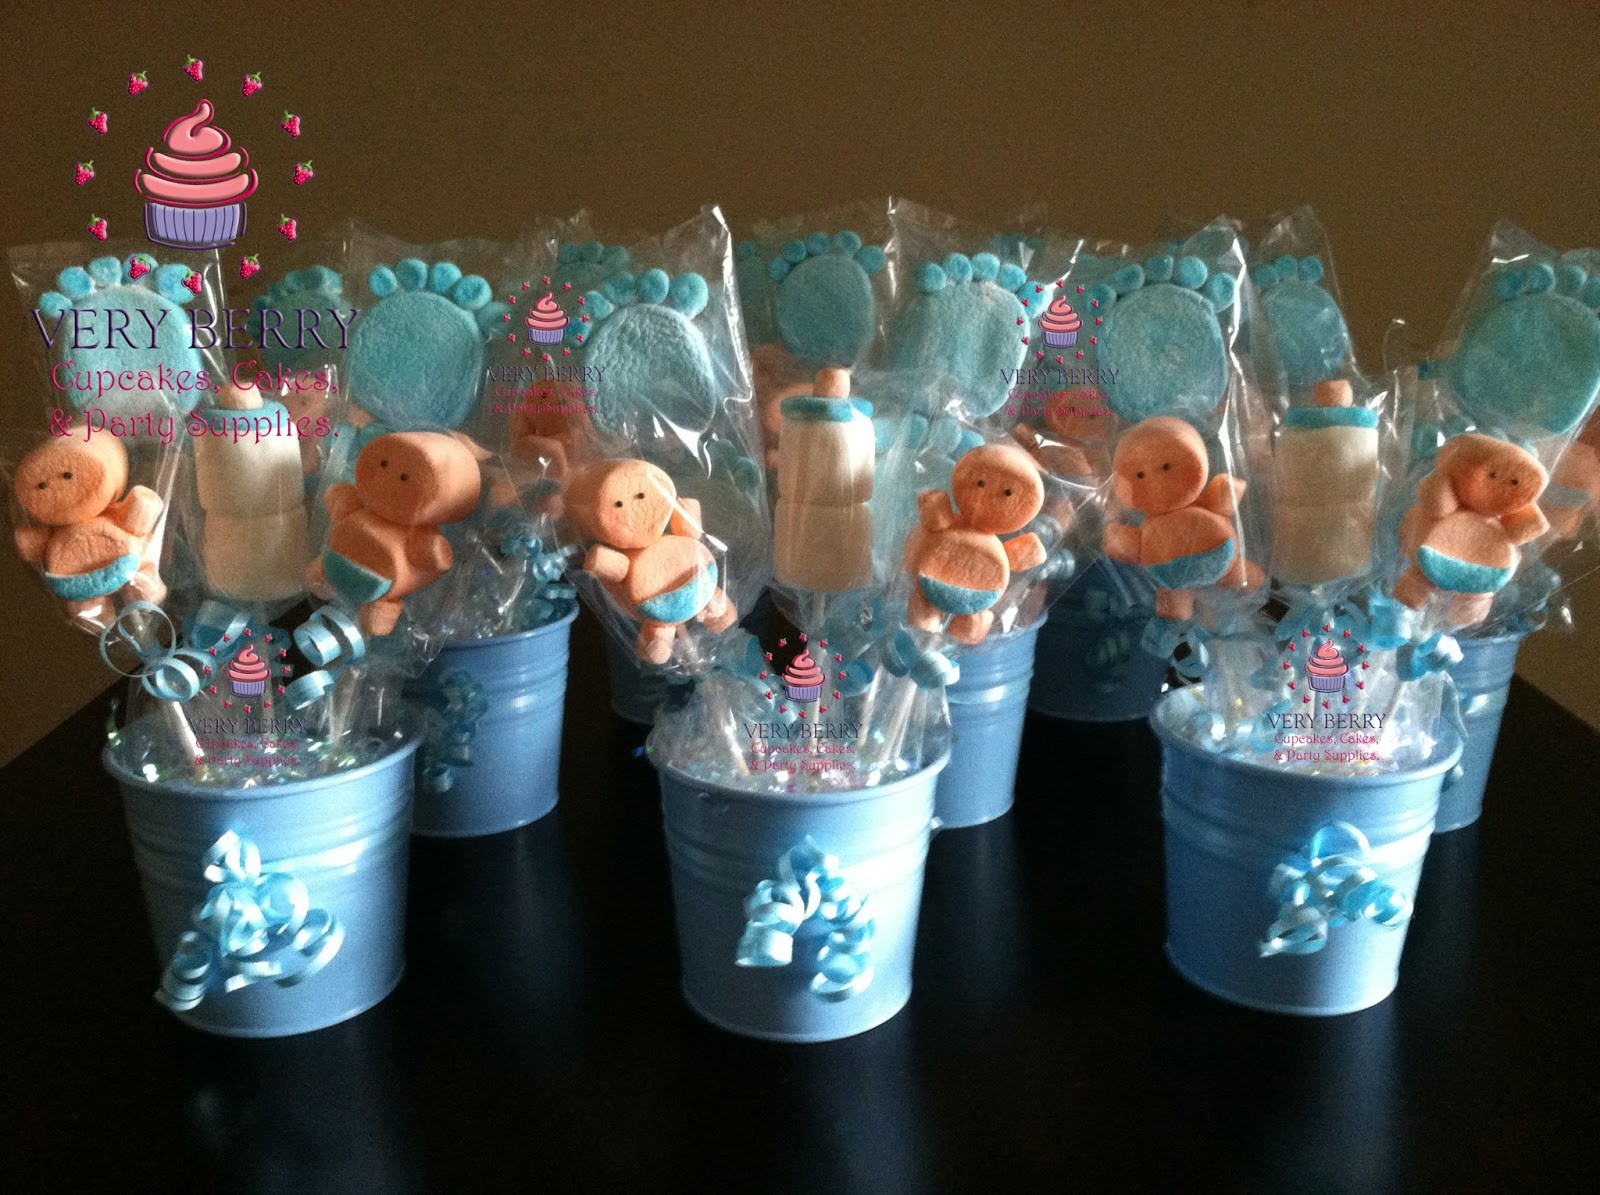 Boy Baby Shower Table Decoration Ideas
 Veryberry Cupcakes BOY BABY SHOWER MARSHMALLOW CENTERPIECES